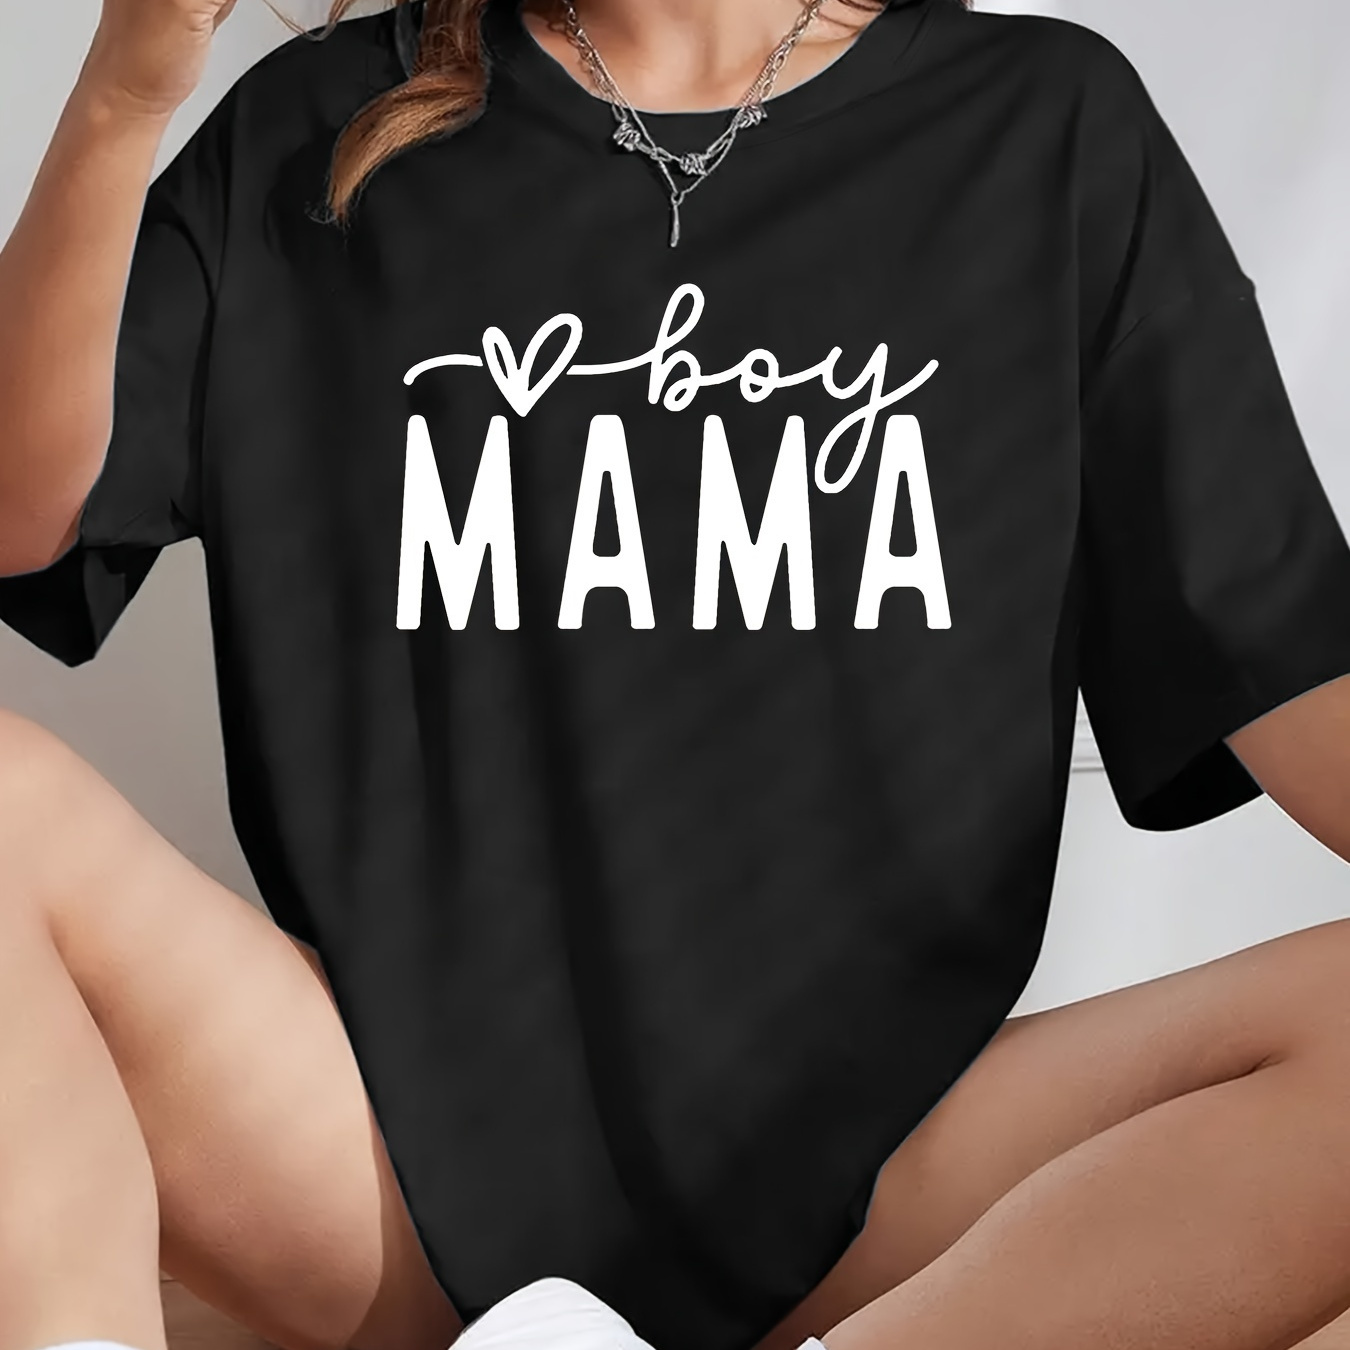 

Boy Mama Print Crew Neck T-shirt, Short Sleeve Casual Top For Summer & Spring, Women's Clothing